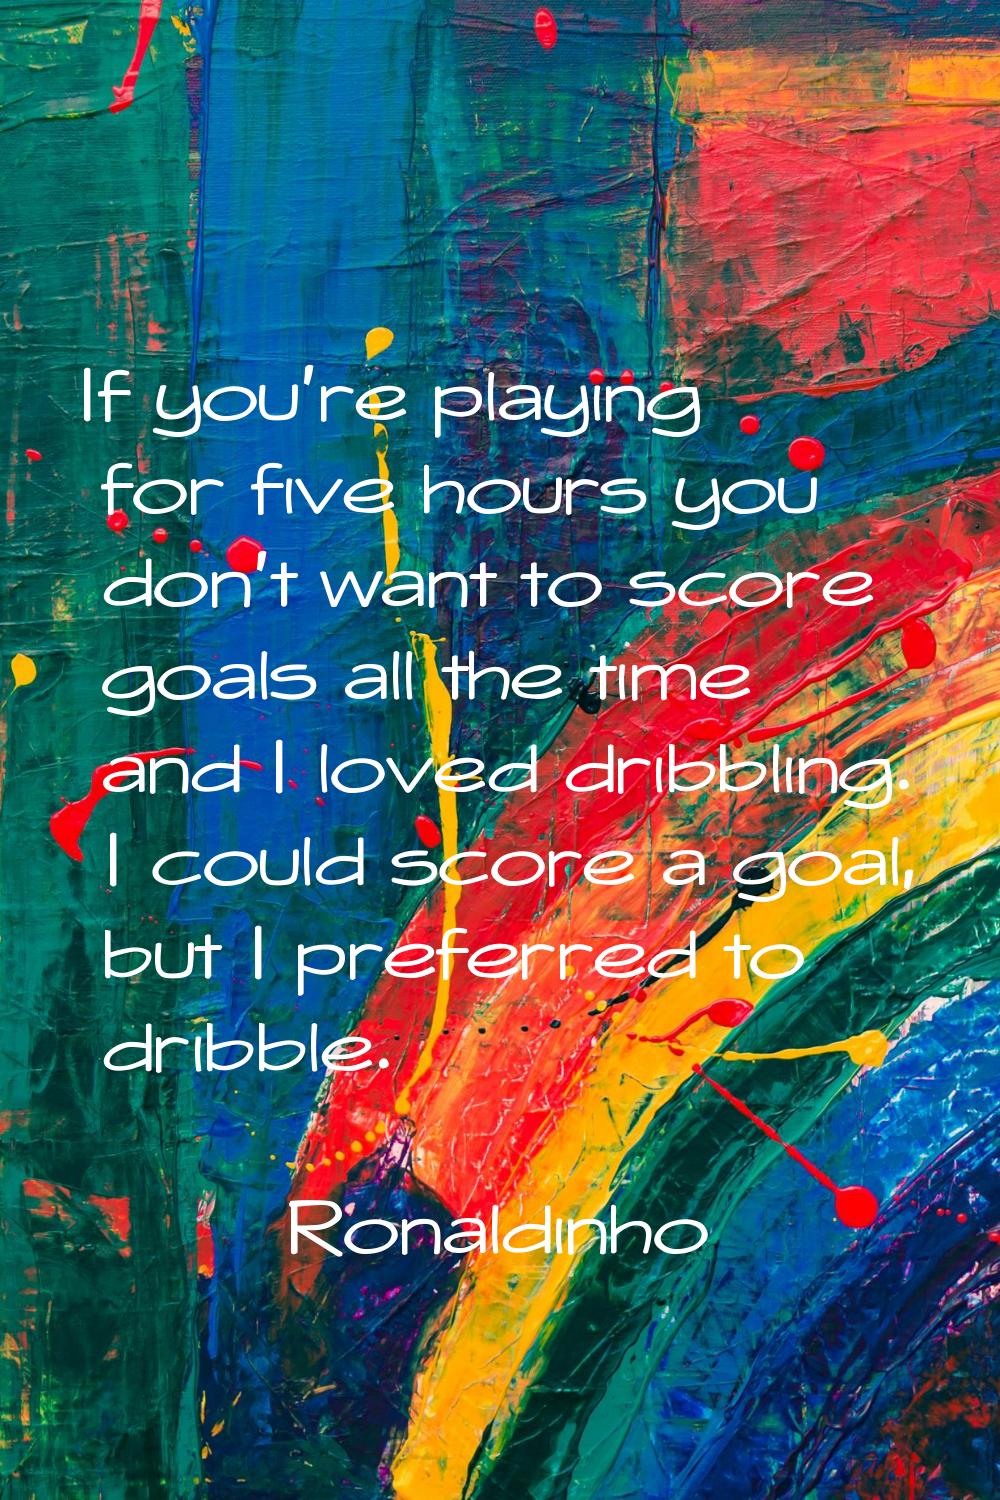 If you're playing for five hours you don't want to score goals all the time and I loved dribbling. 